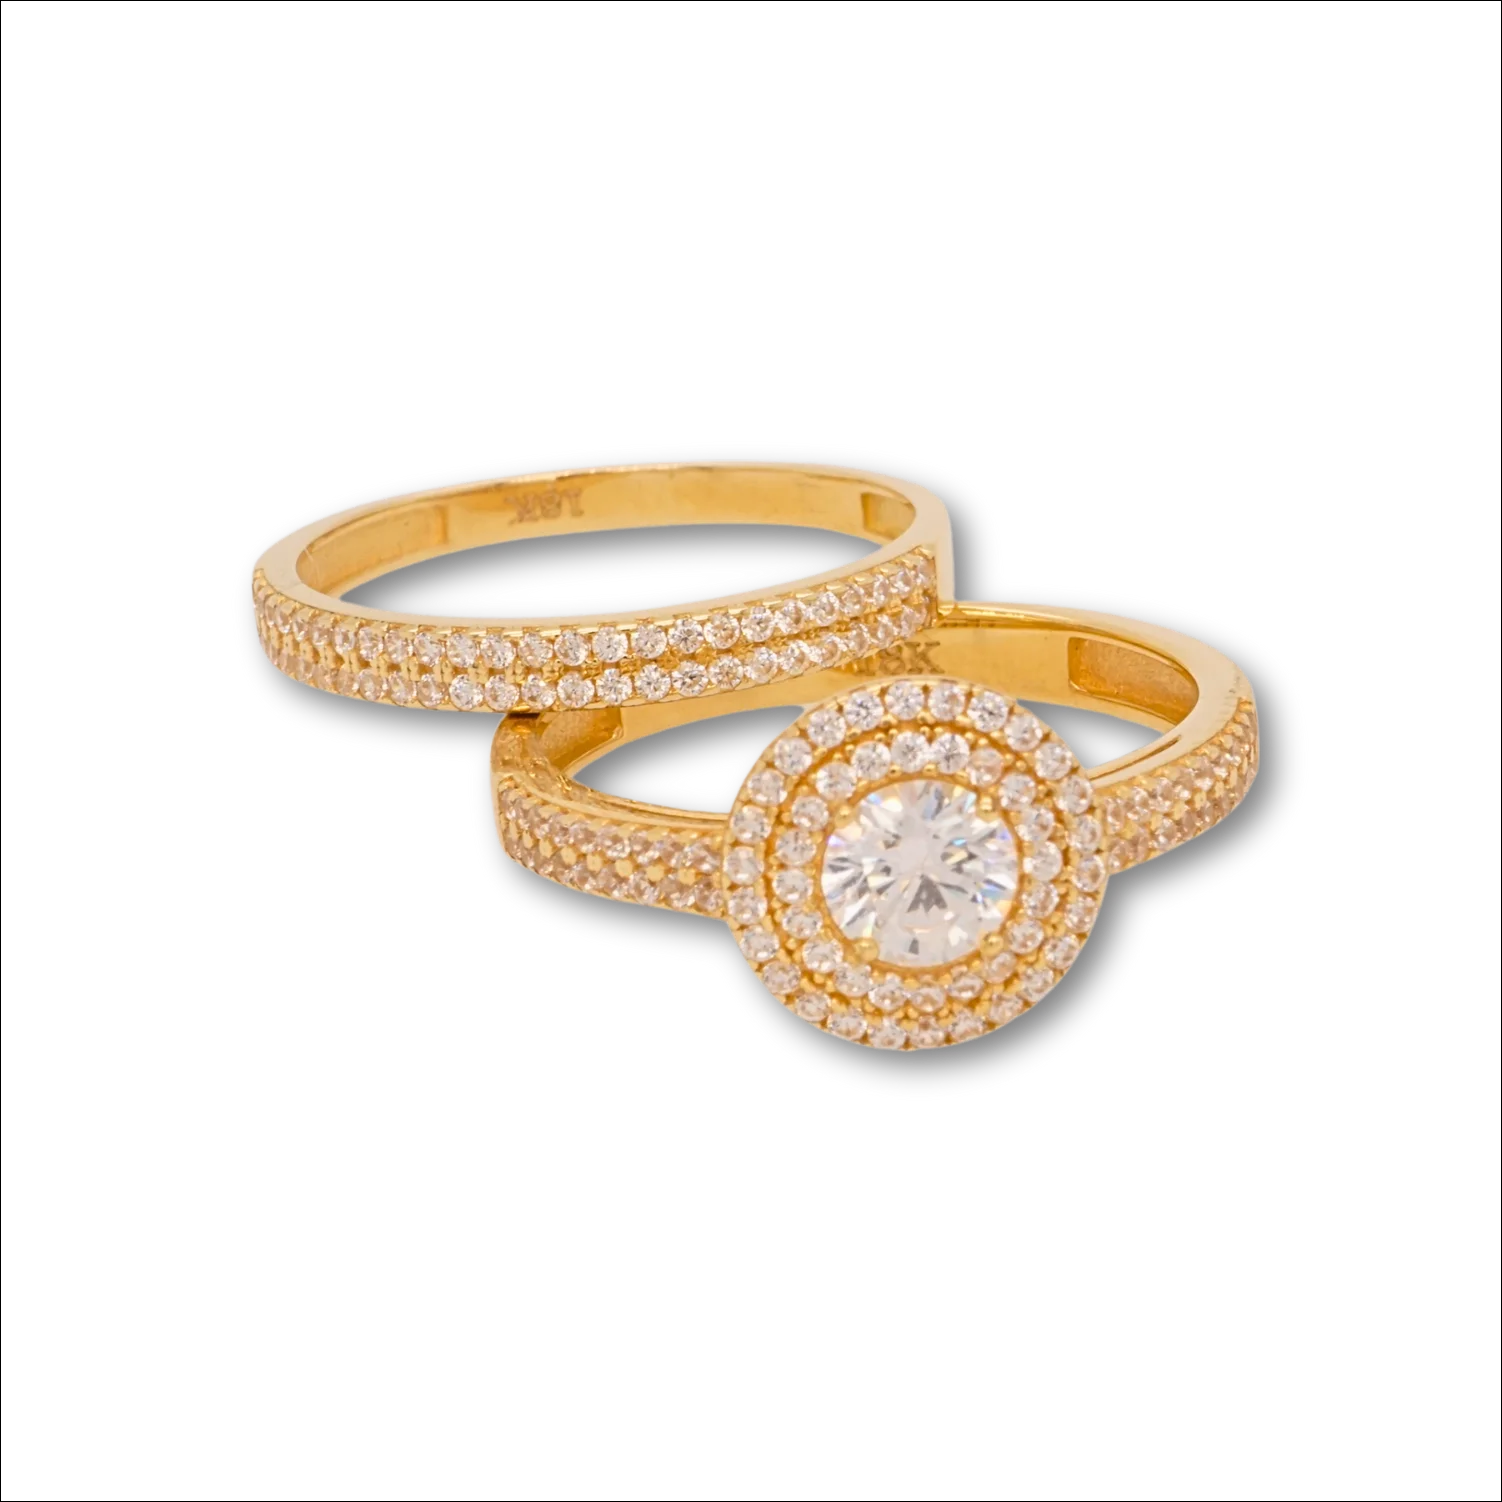 Elegant 18k gold engagement ring with cz sparkle | Rings